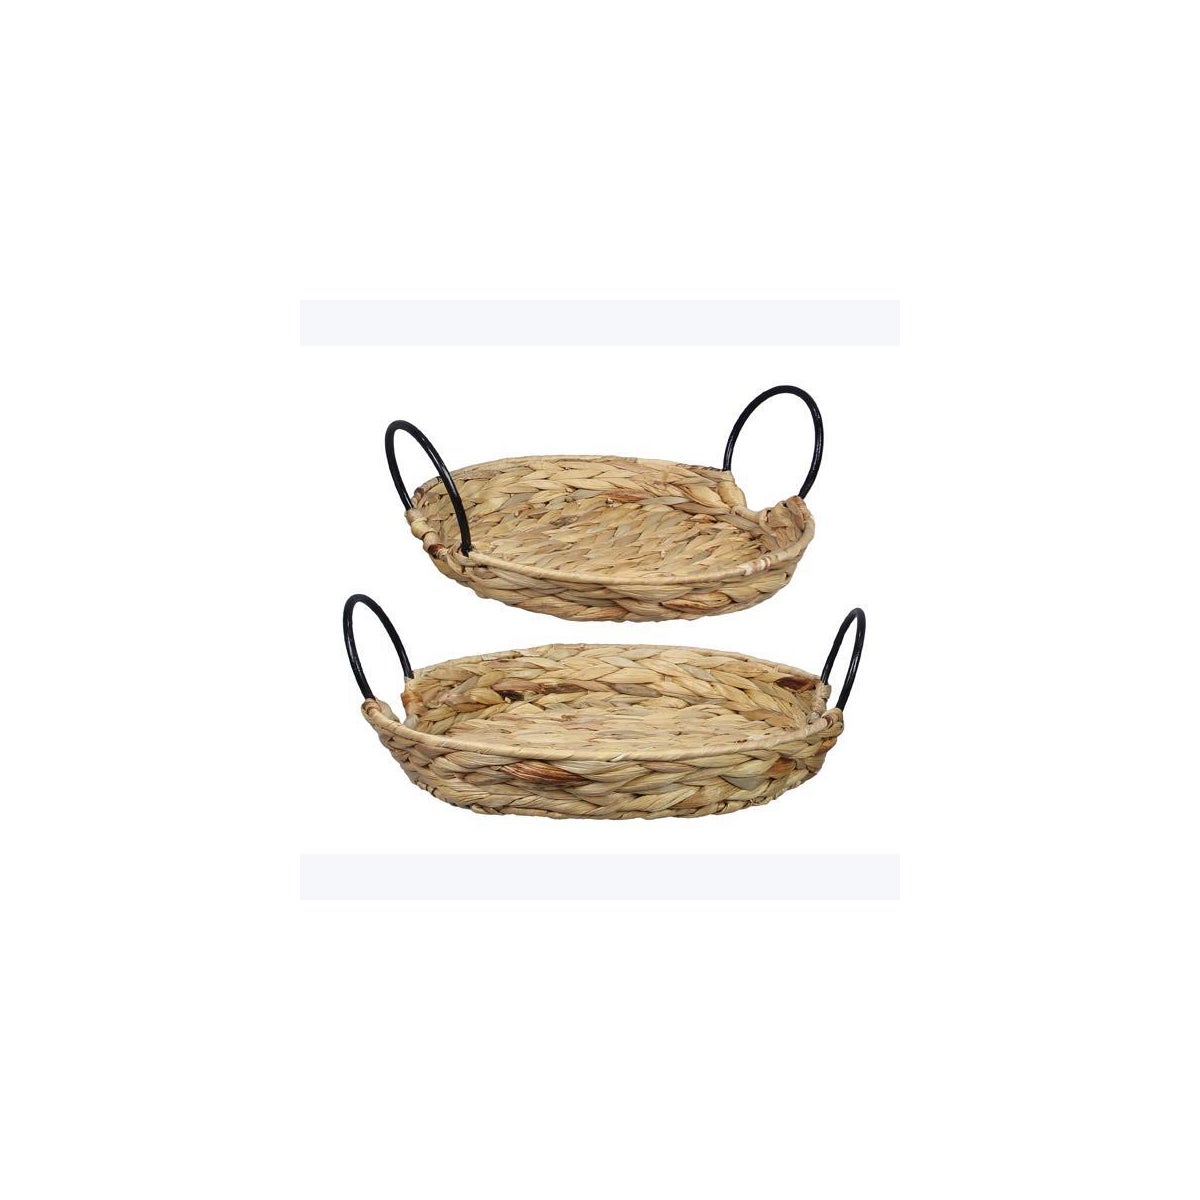 Woven Grass Round Tray with Handle, Set of 2